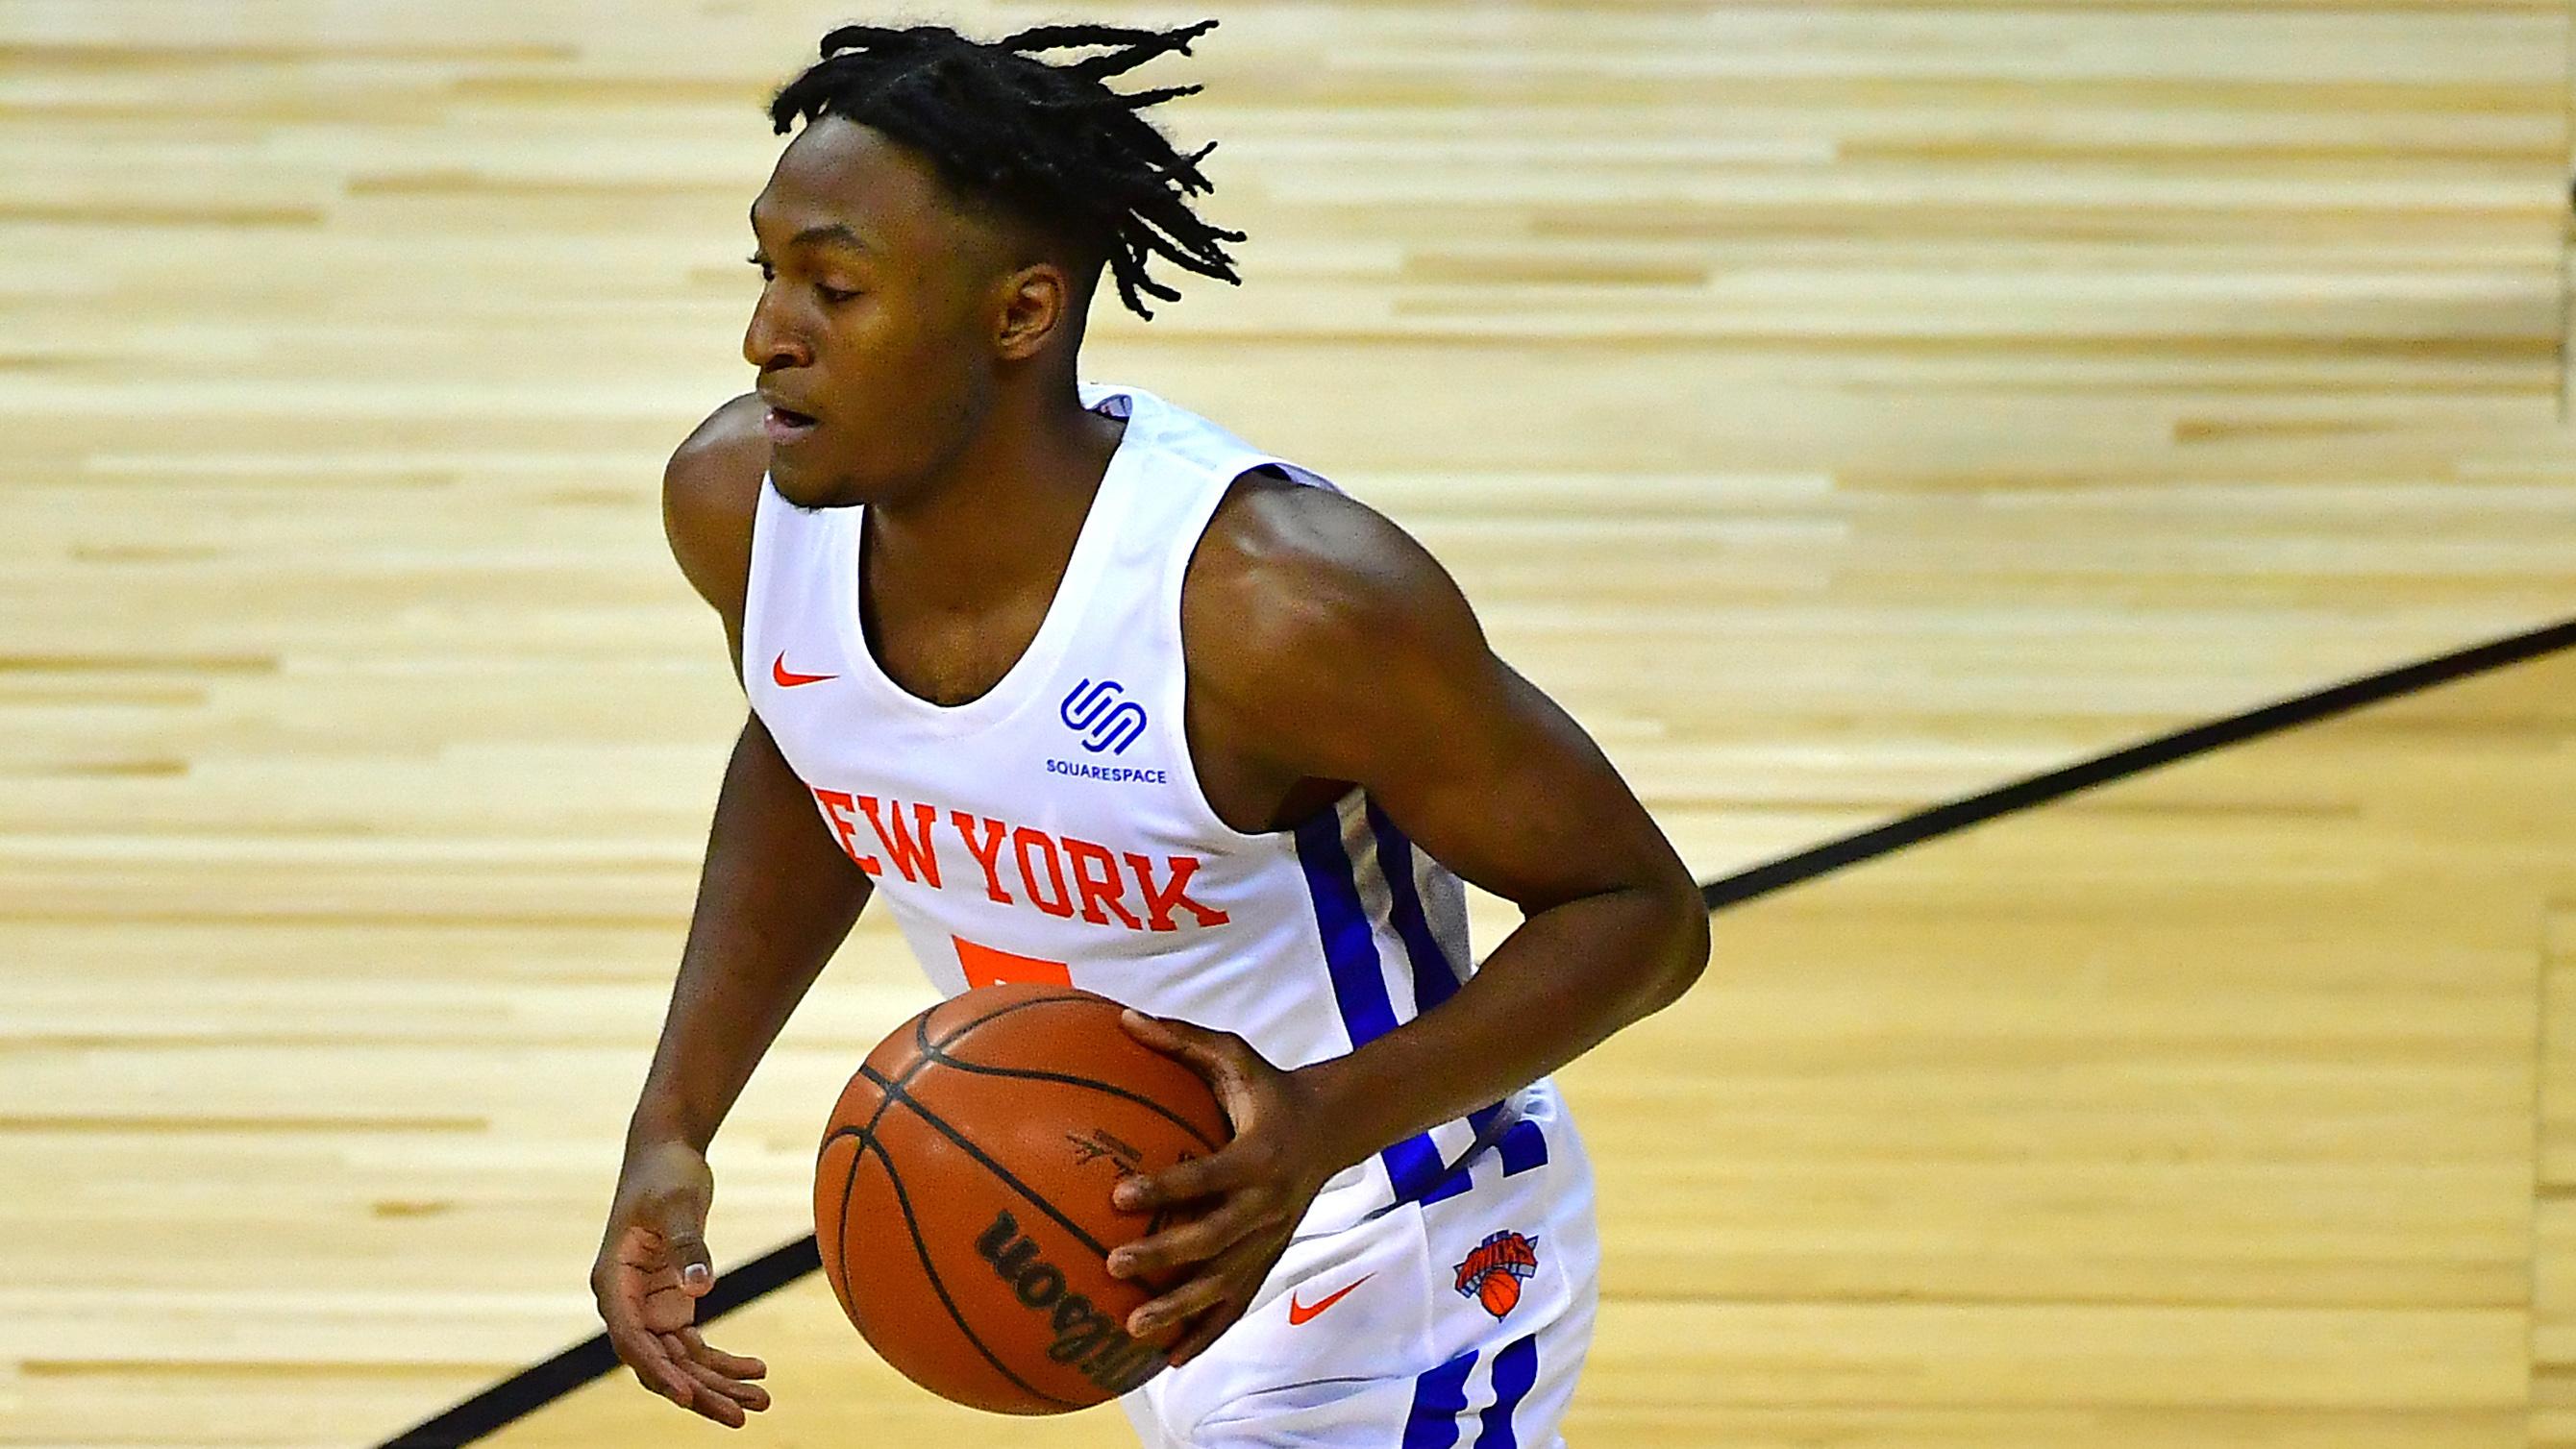 New York Knicks guard Immanuel Quickley (5) dribbles during an NBA Summer League game against the Toronto Raptors at Thomas & Mack Center. / Stephen R. Sylvanie-USA TODAY Sports